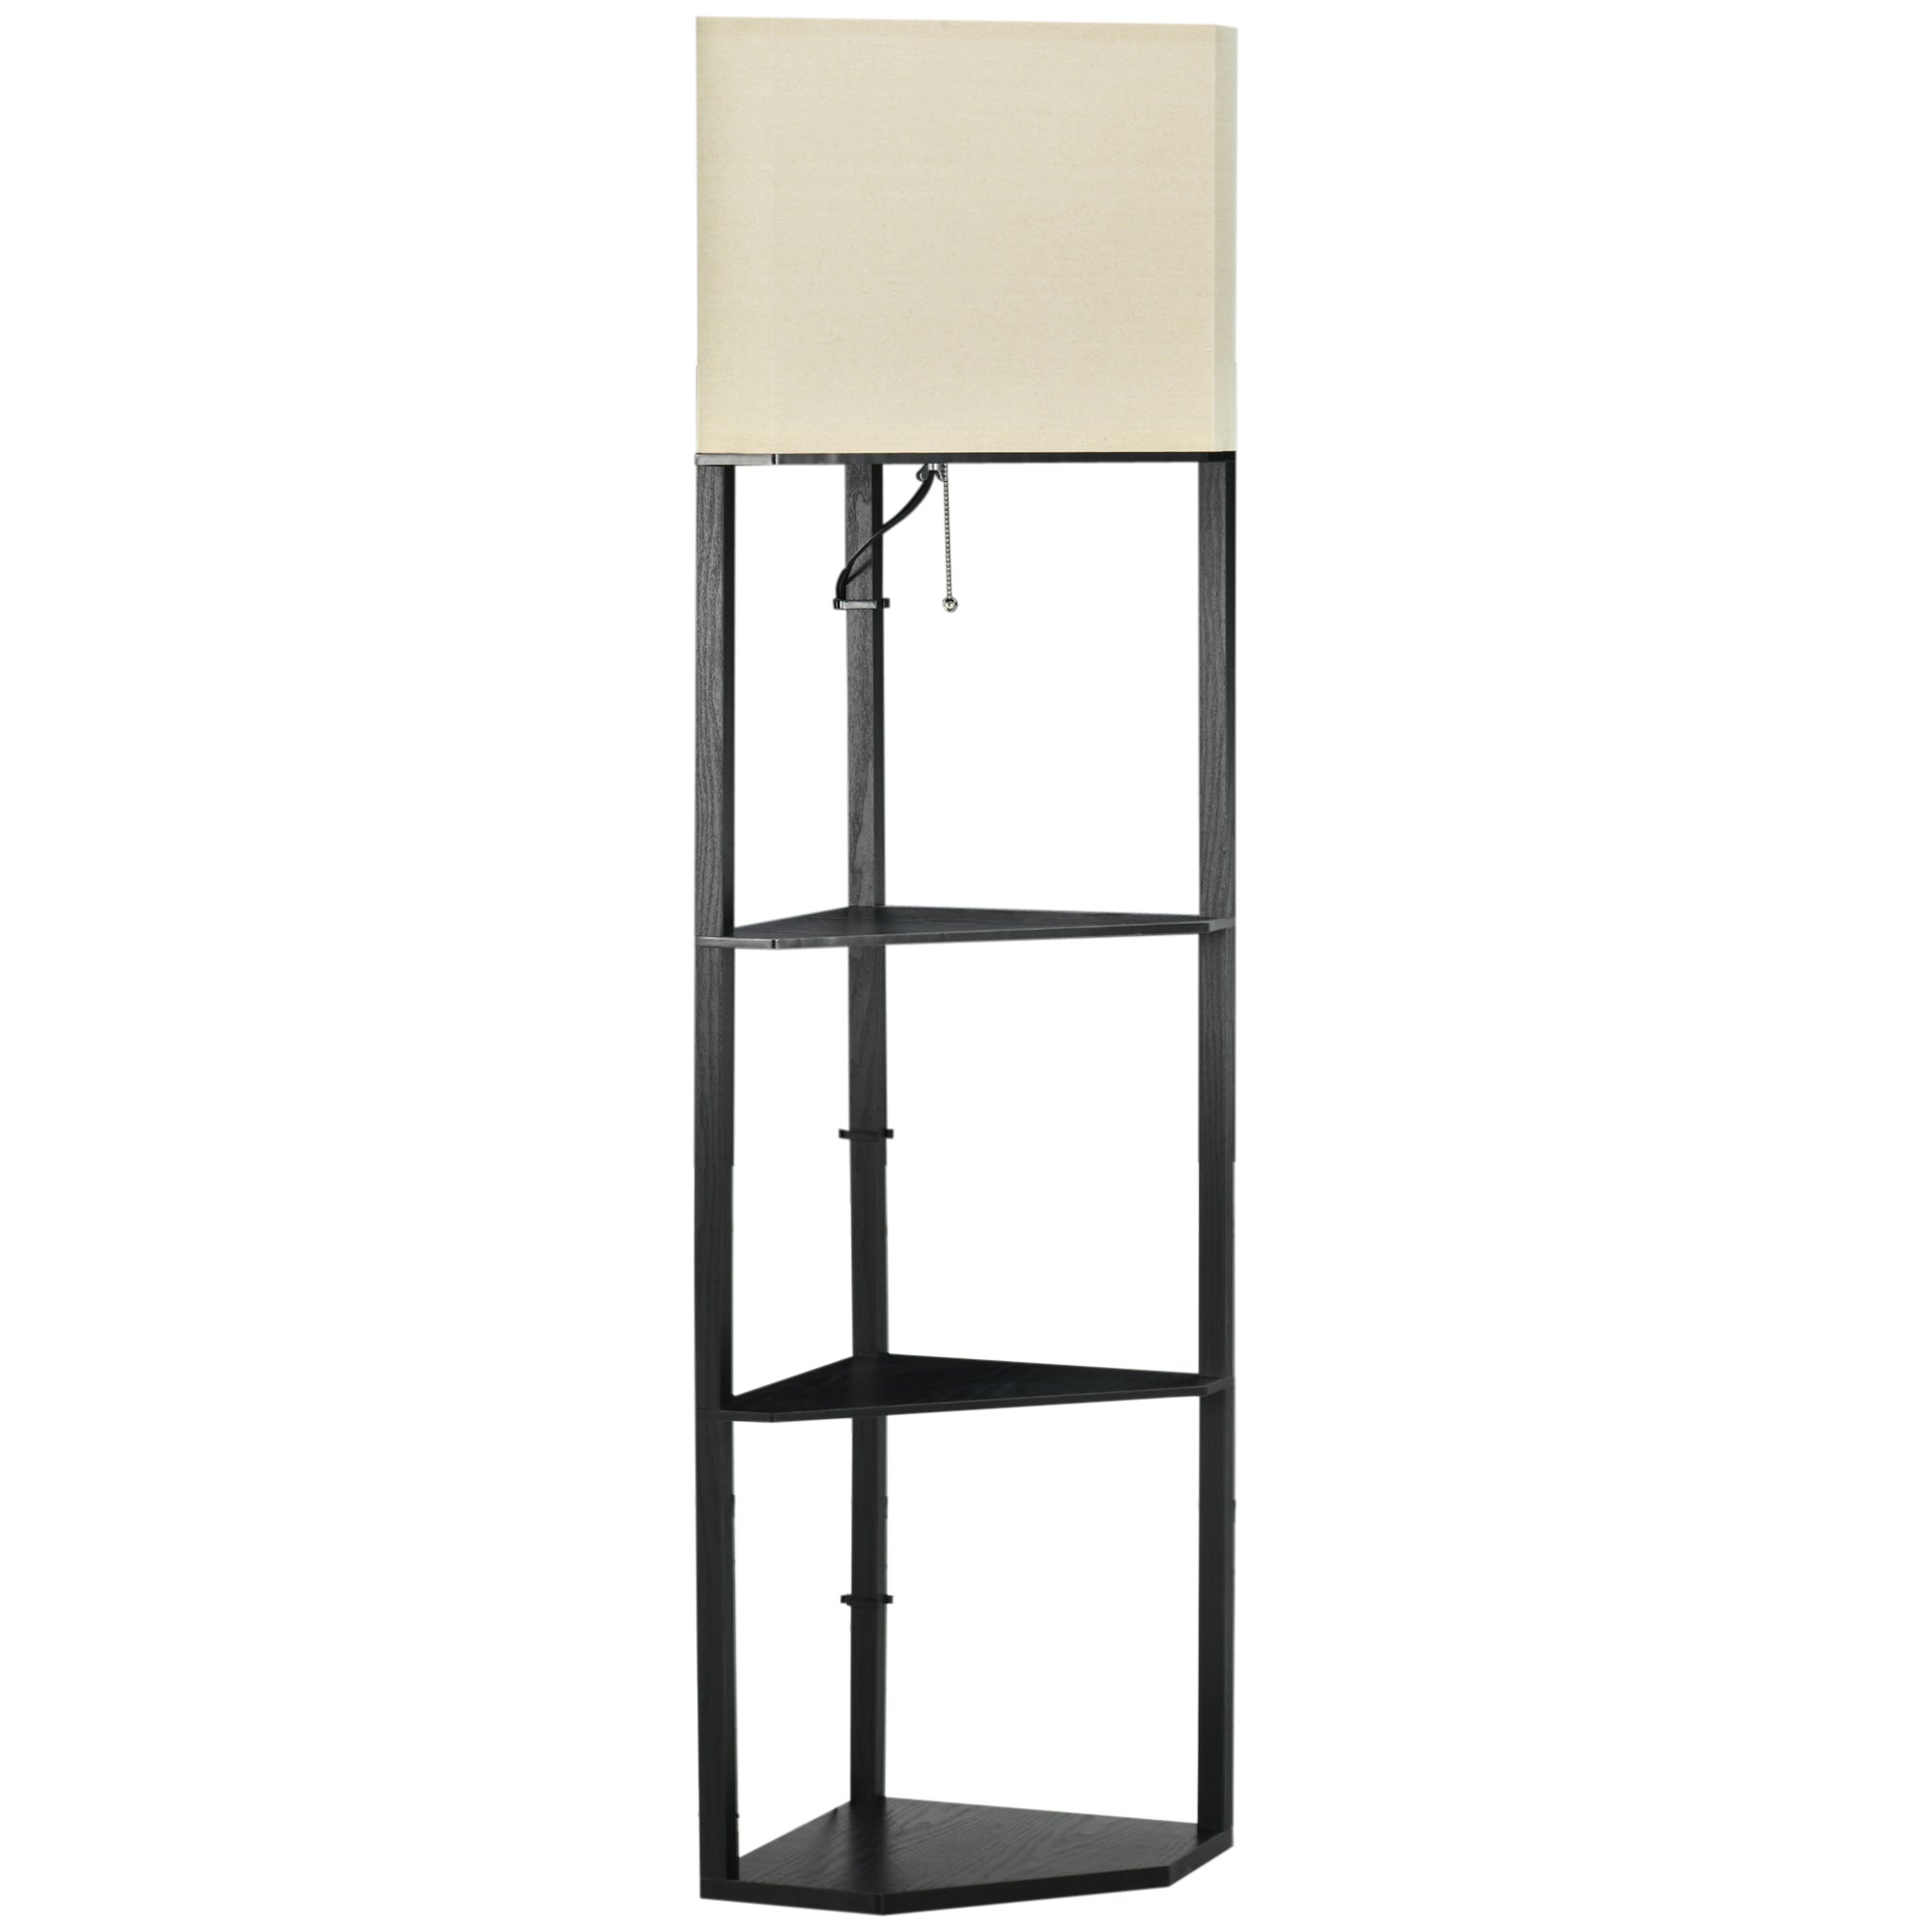 Corner Floor Lamp with Shelves, Modern Tall Standing Lamps for Living Room, Bedroom, with Pull Chain Switch (Bulb not Included), Black  AOSOM   